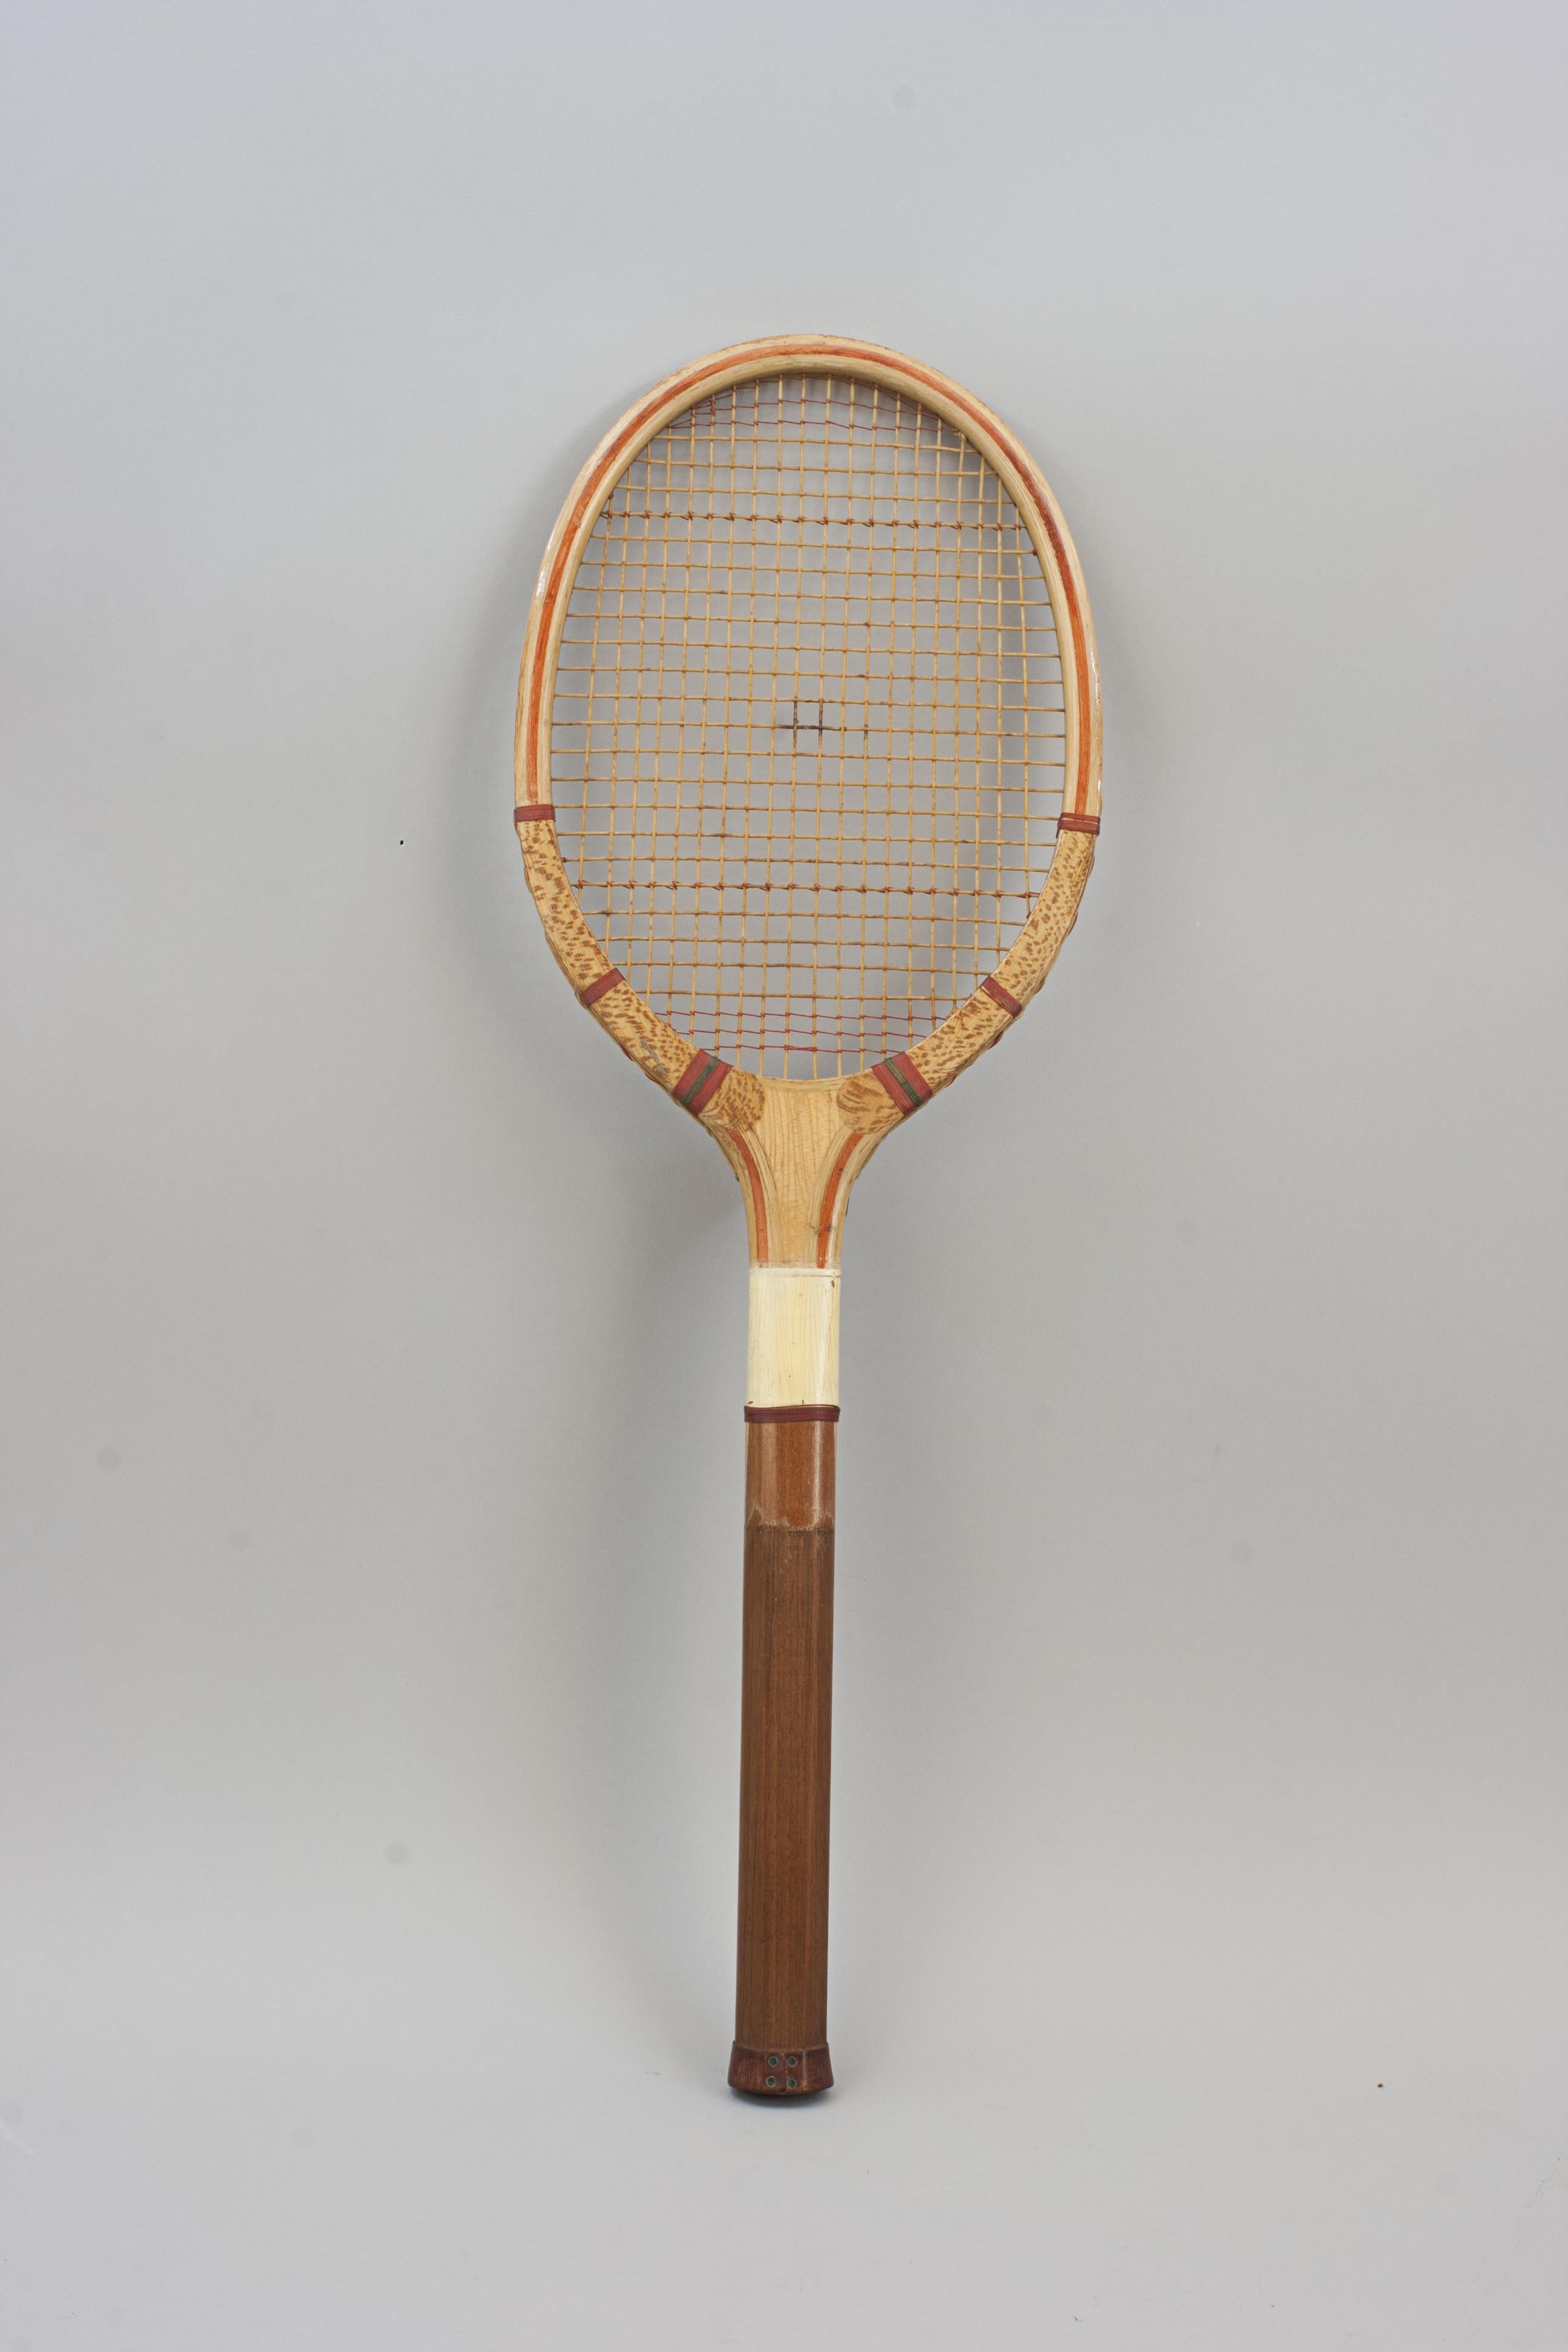 The True Bat Lawn Tennis Racket.
A lawn tennis racket by unknown maker, 'The True Bat'. A nice ash laminated frame with concave wedge. The wedge with decal 'The True Bat' with an image of a flying bat. The racket has the original red shoulder